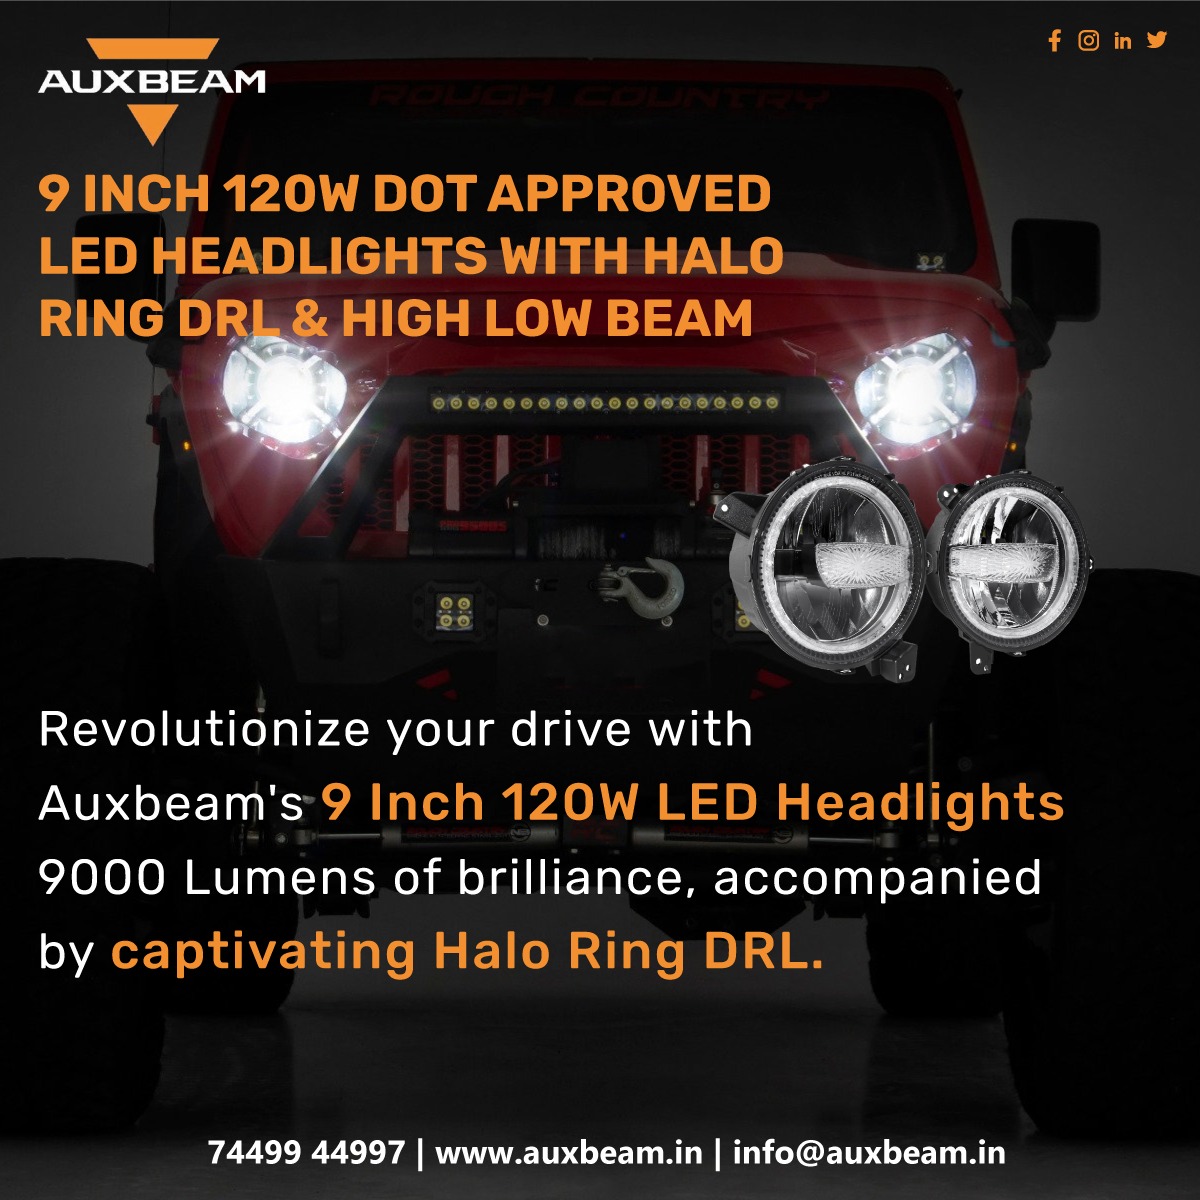 Revolutionize your drive with Auxbeam's 9 Inch 120W LED Headlights - 9000 Lumens of brilliance, accompanied by captivating Halo Ring DRL.

#AuxbeamLED #LEDHeadlights #RevolutionizeYourDrive #BrightLights #9000Lumens #HeadlightUpgrade #HaloRingDRL #CarAccessories #AutoUpgrades